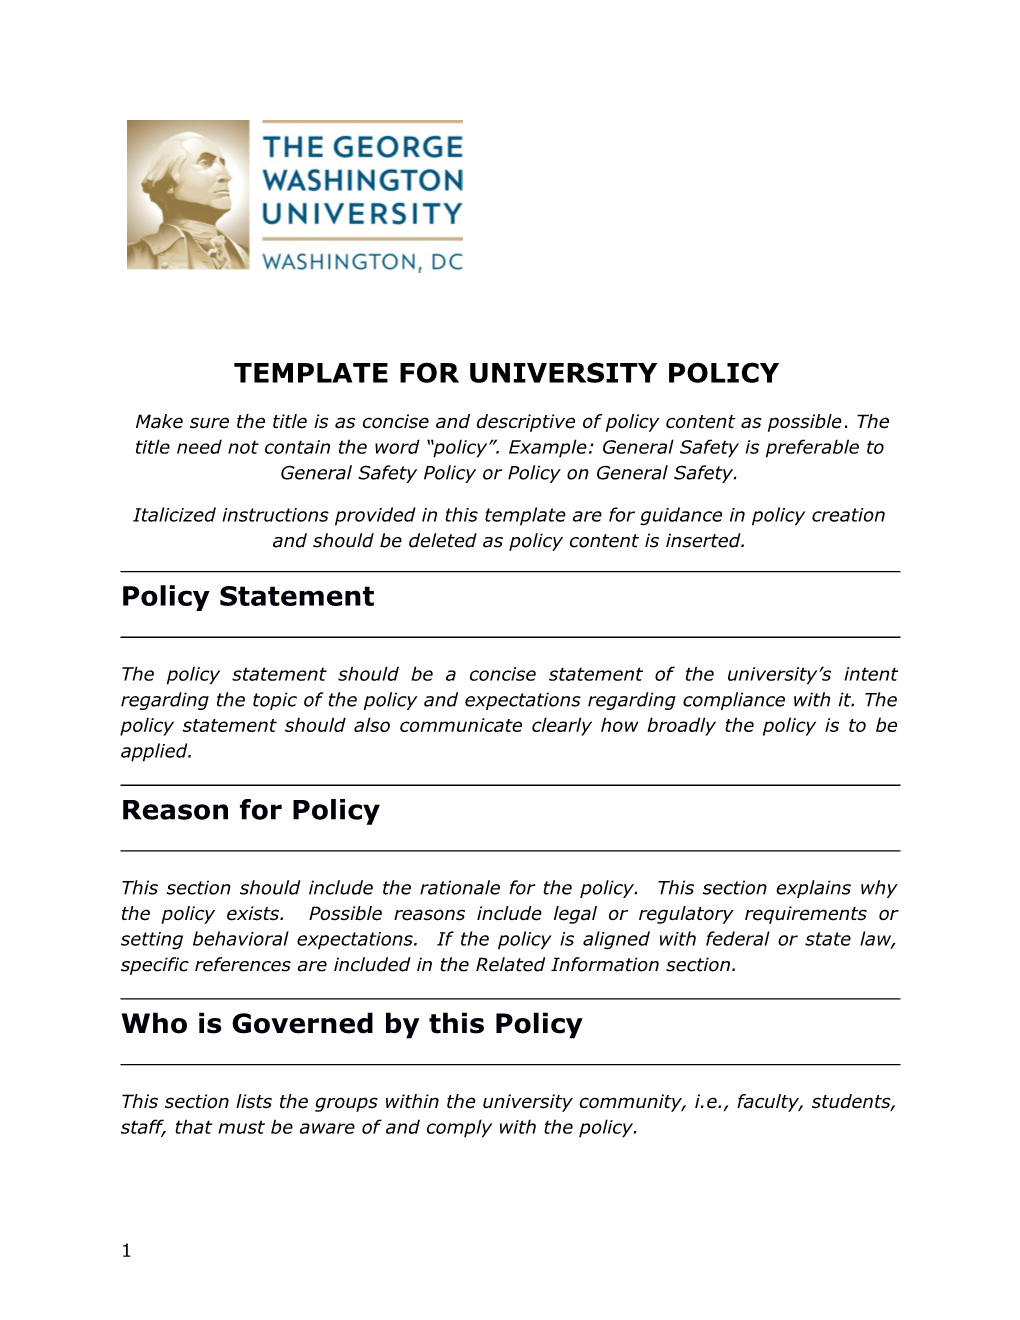 Template for University Policy